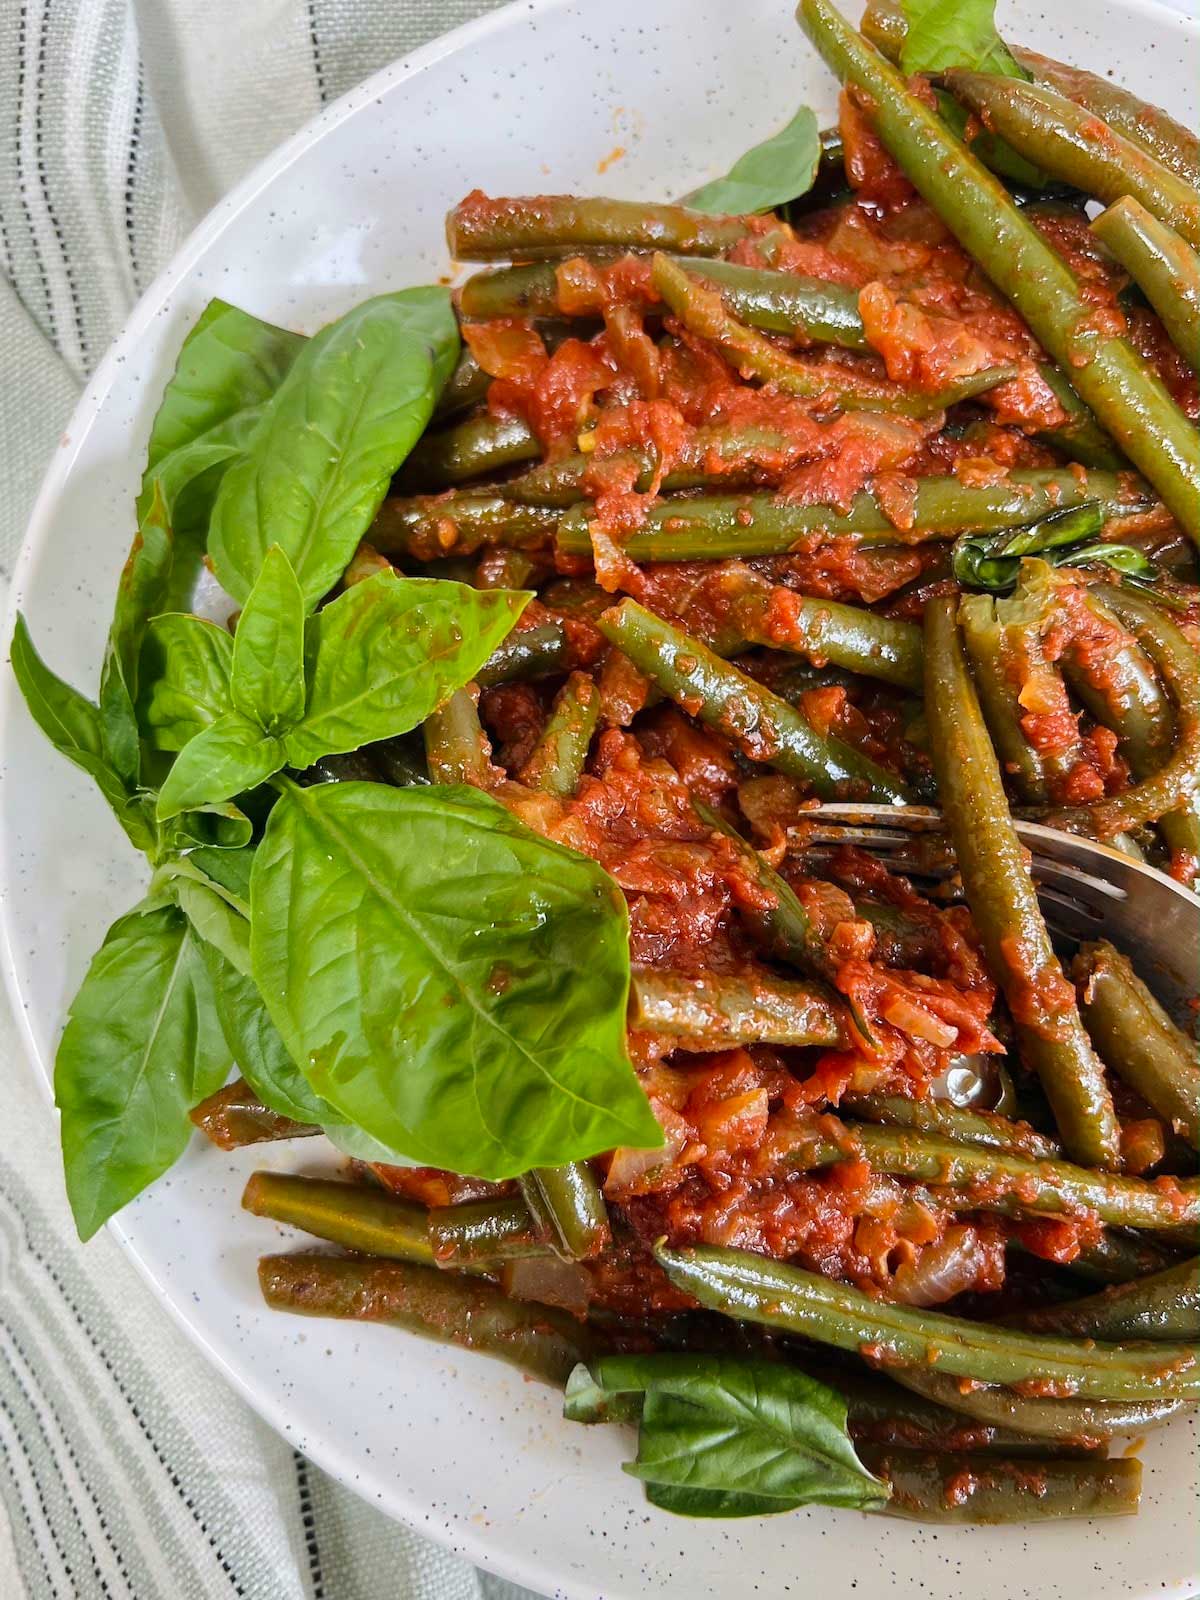 Green beans in tomato sauce topped with basil.